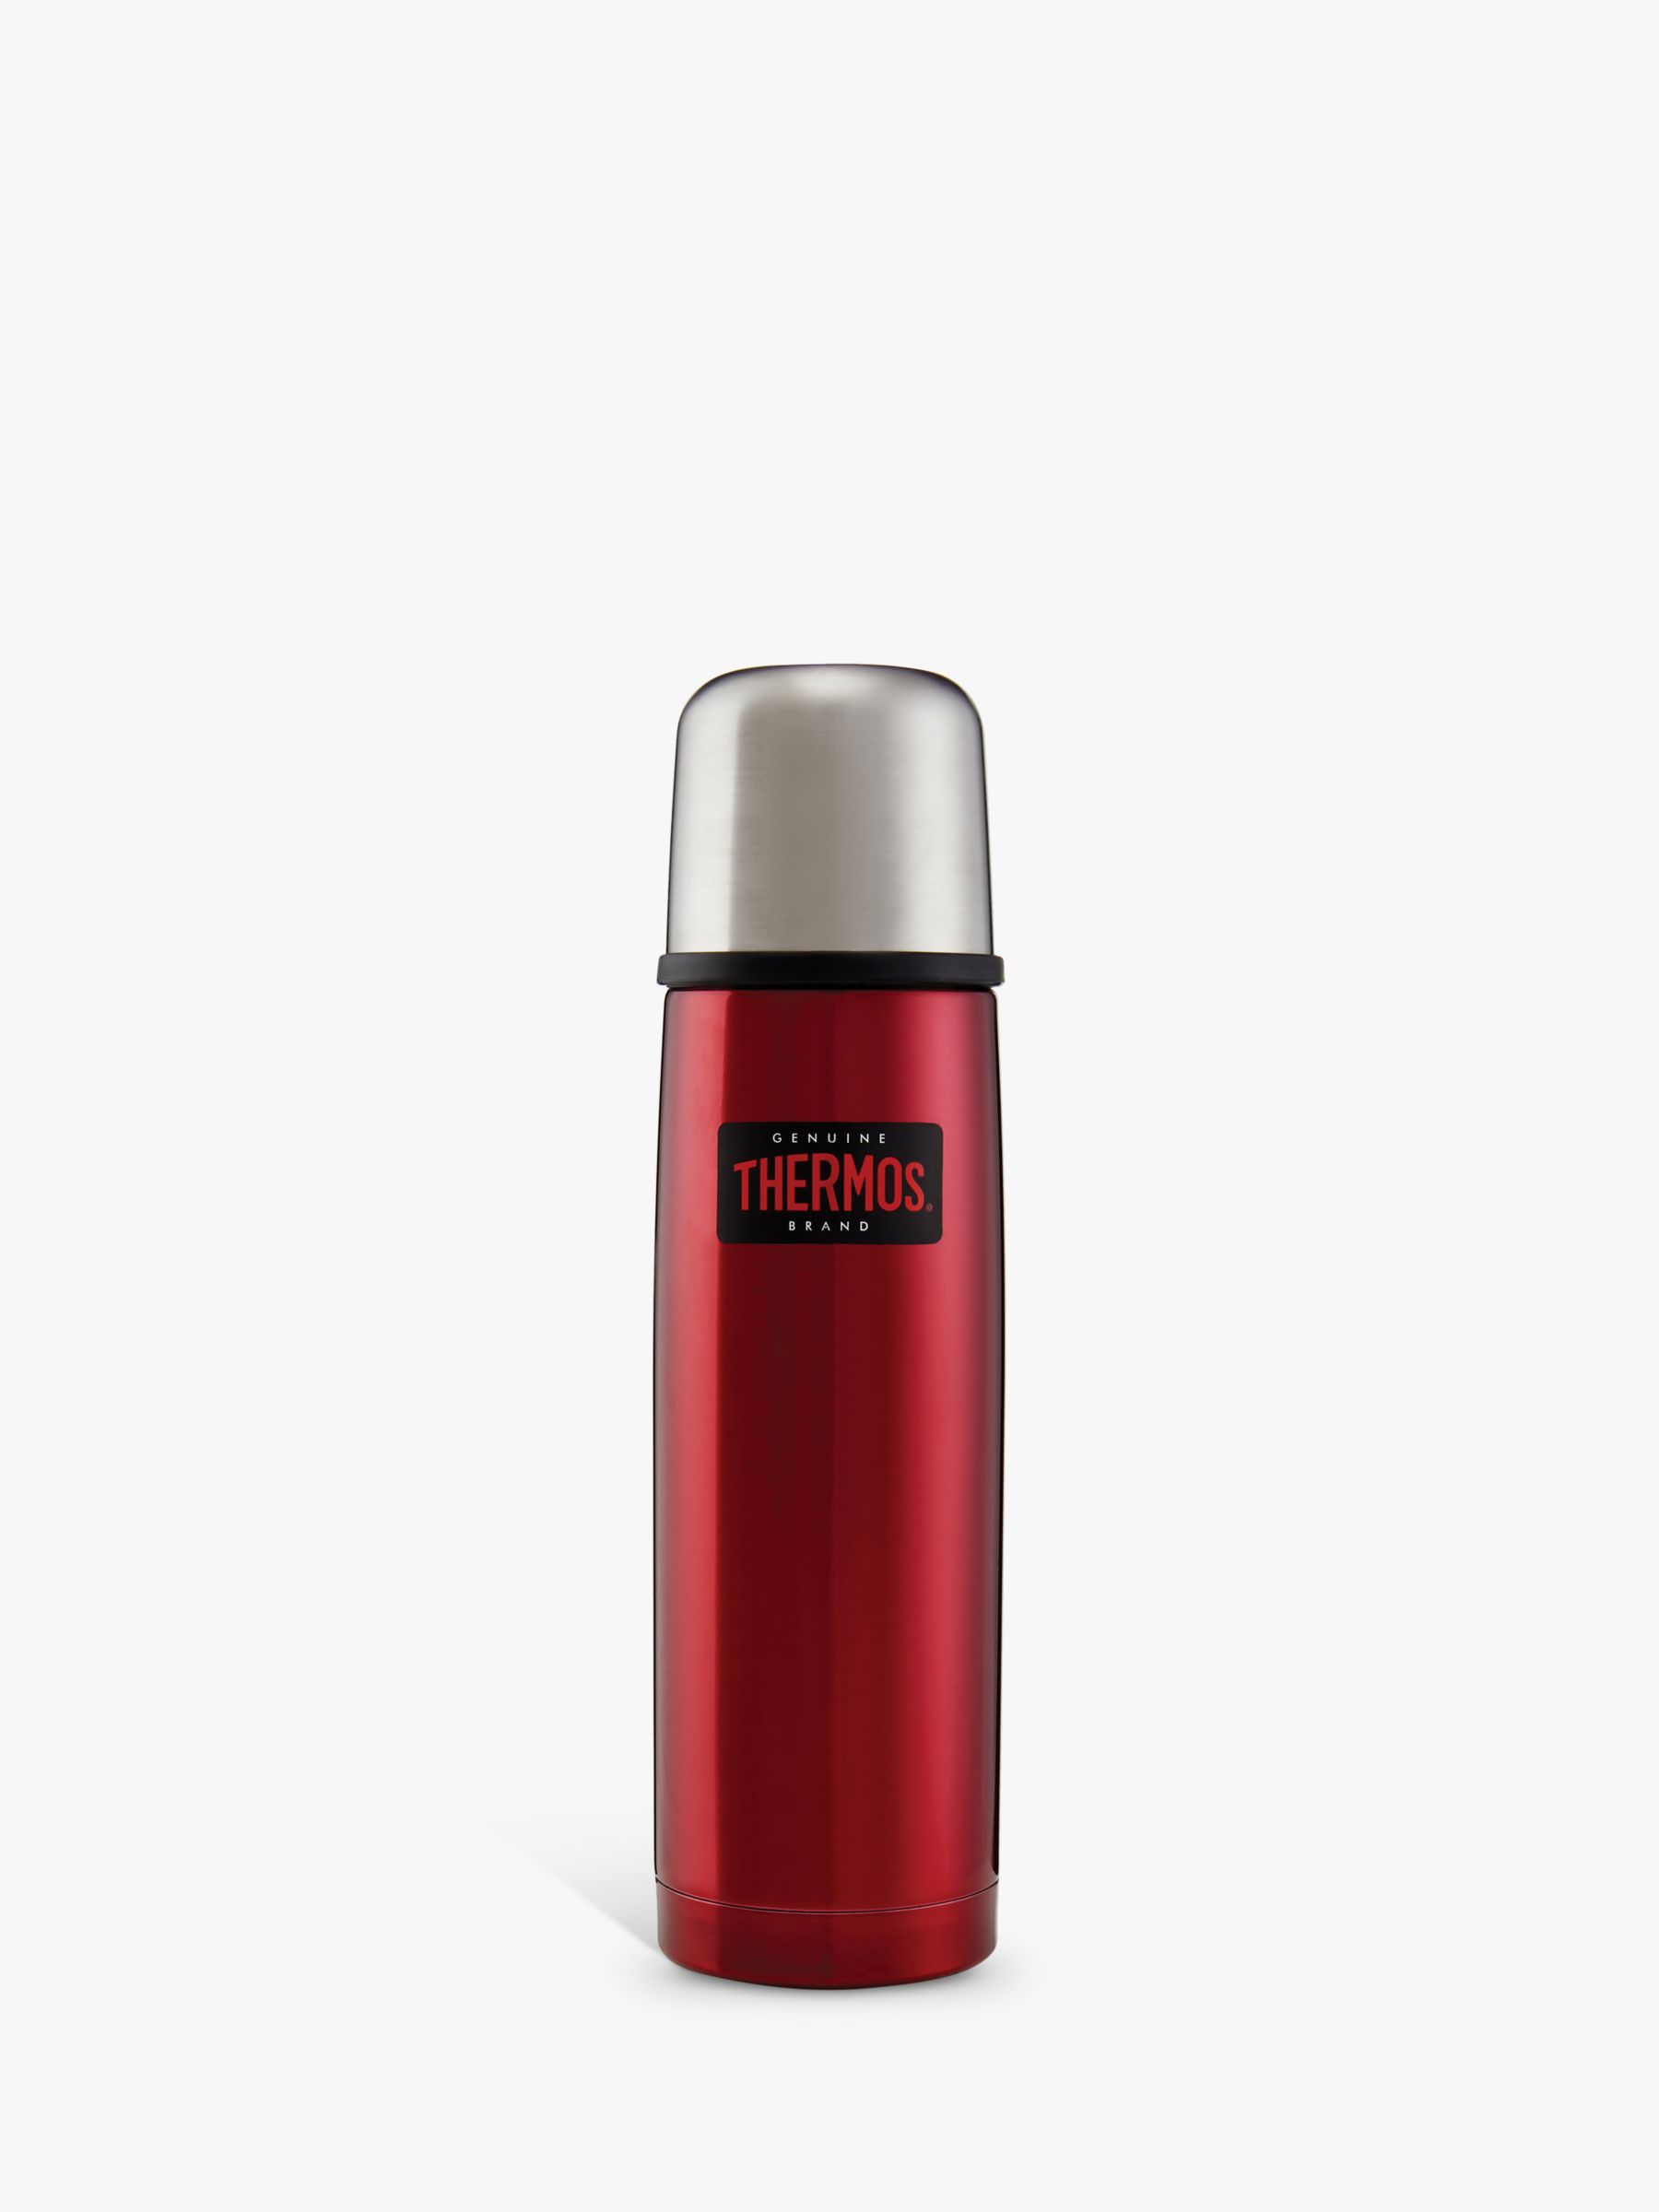 where can i buy a thermos